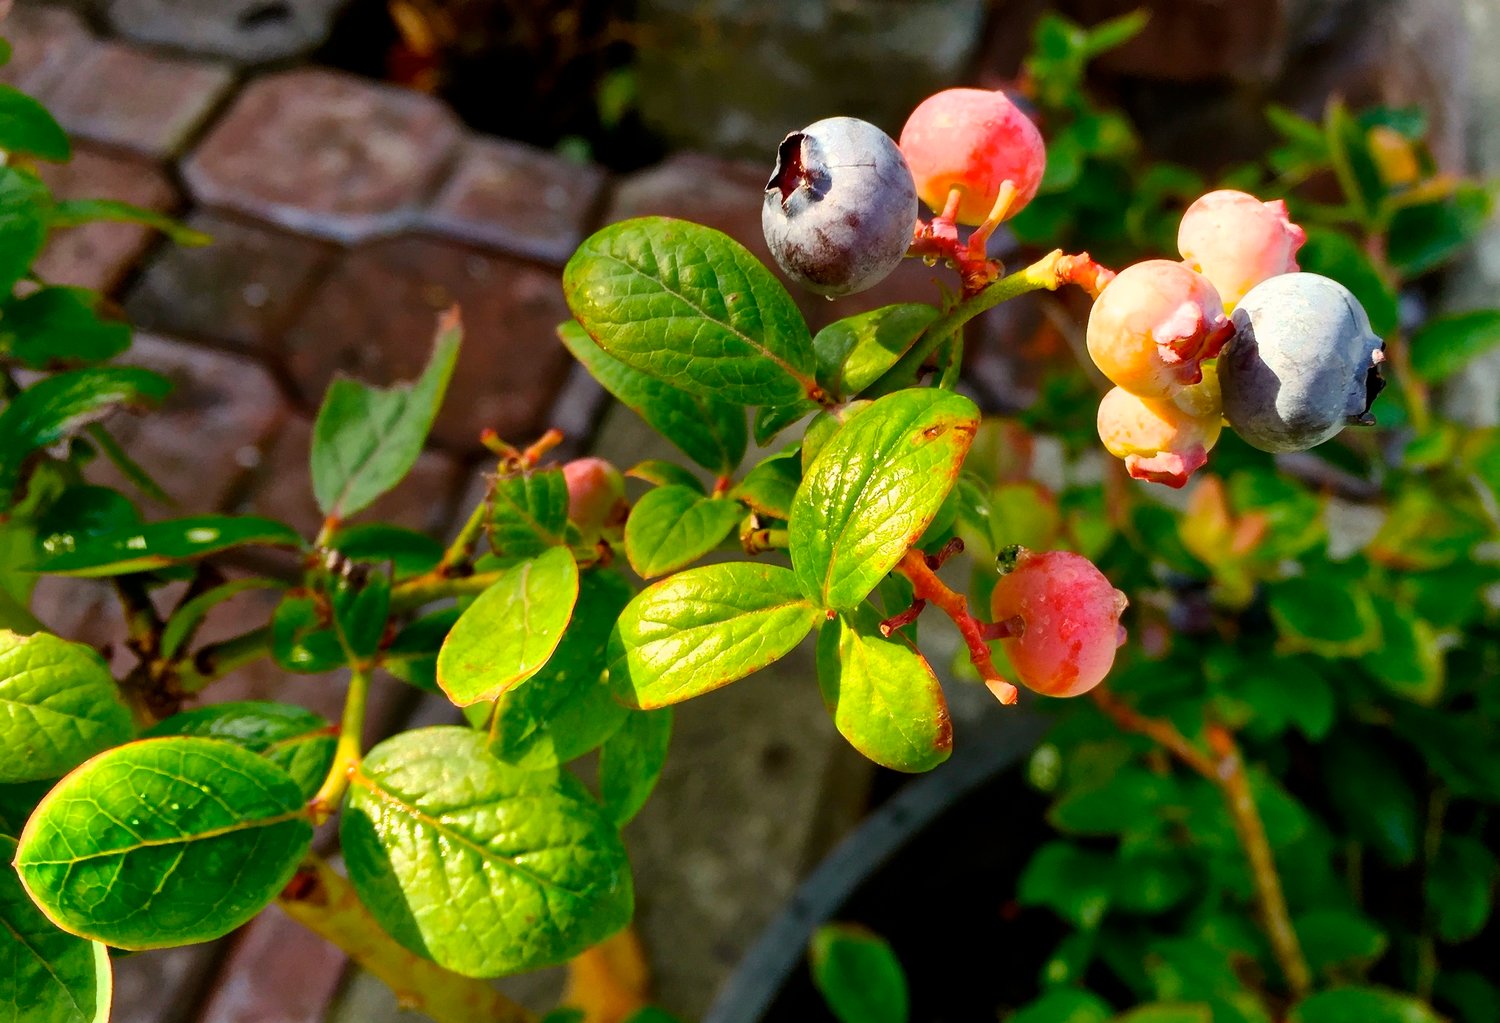 MAKING CHANGES — This July 2016 photo of blueberries growing in a container on a property near Langley, Wash., illustrates that gardeners operate on a much smaller scale than farmers yet can make some major sustainability impacts by growing their own food and planting things that don’t need as much fertilizer or pesticides, minimizing risks to the environment.